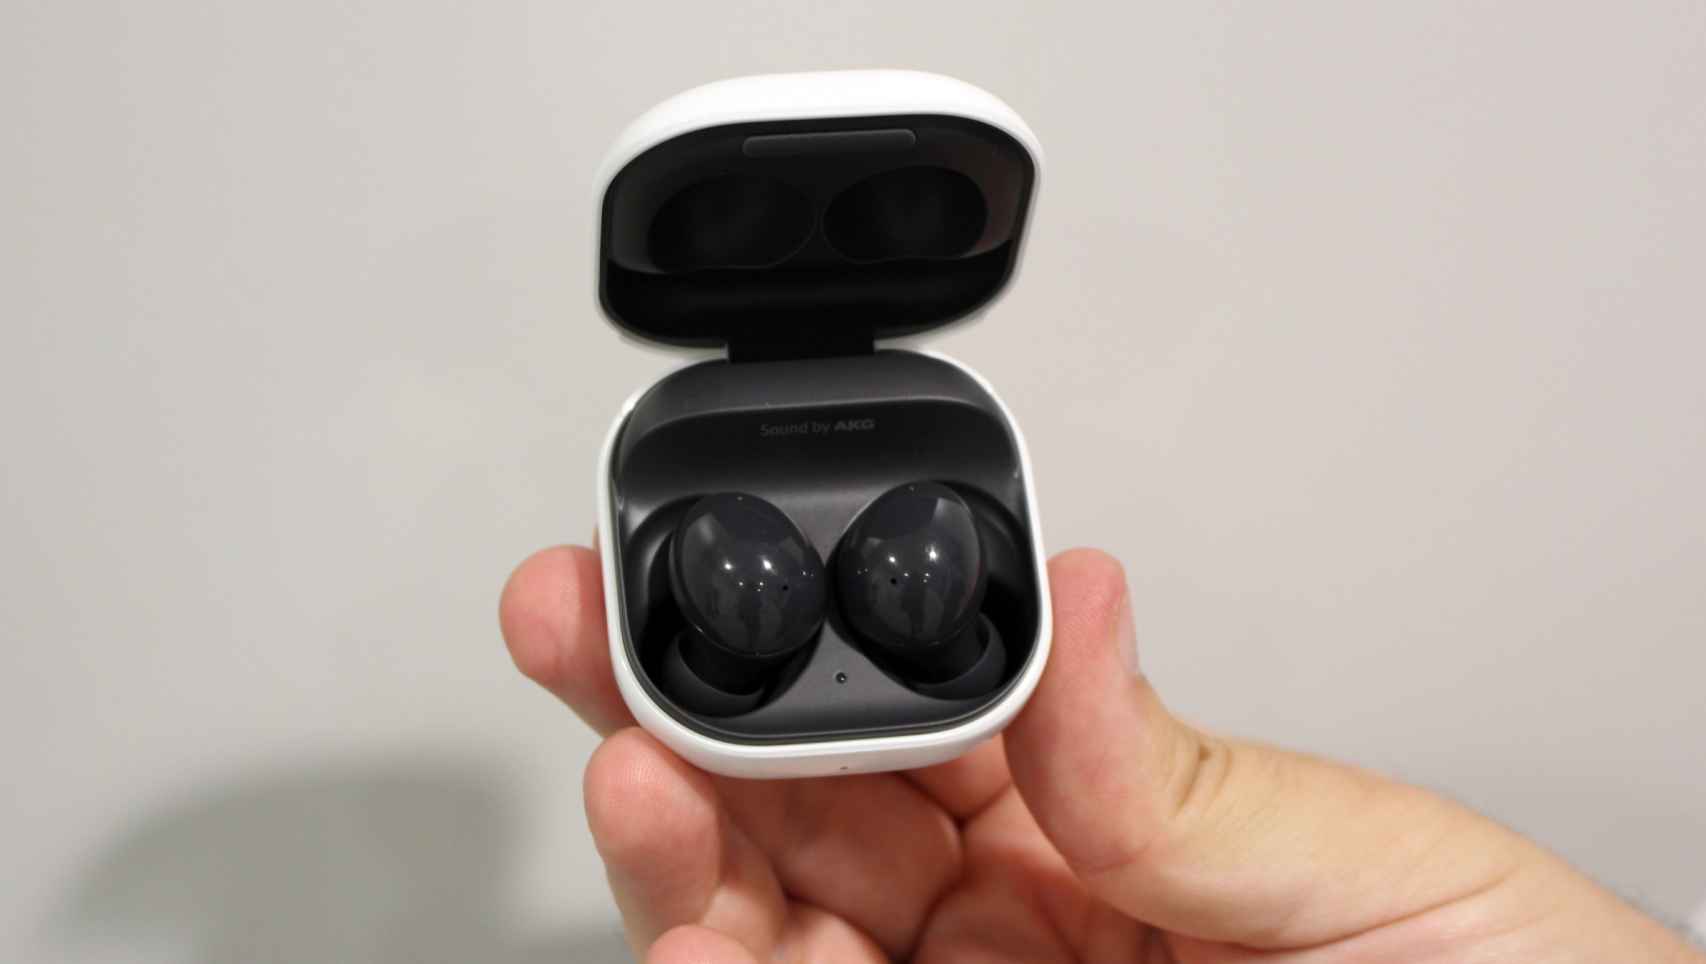 So are the Samsung Galaxy Buds 2